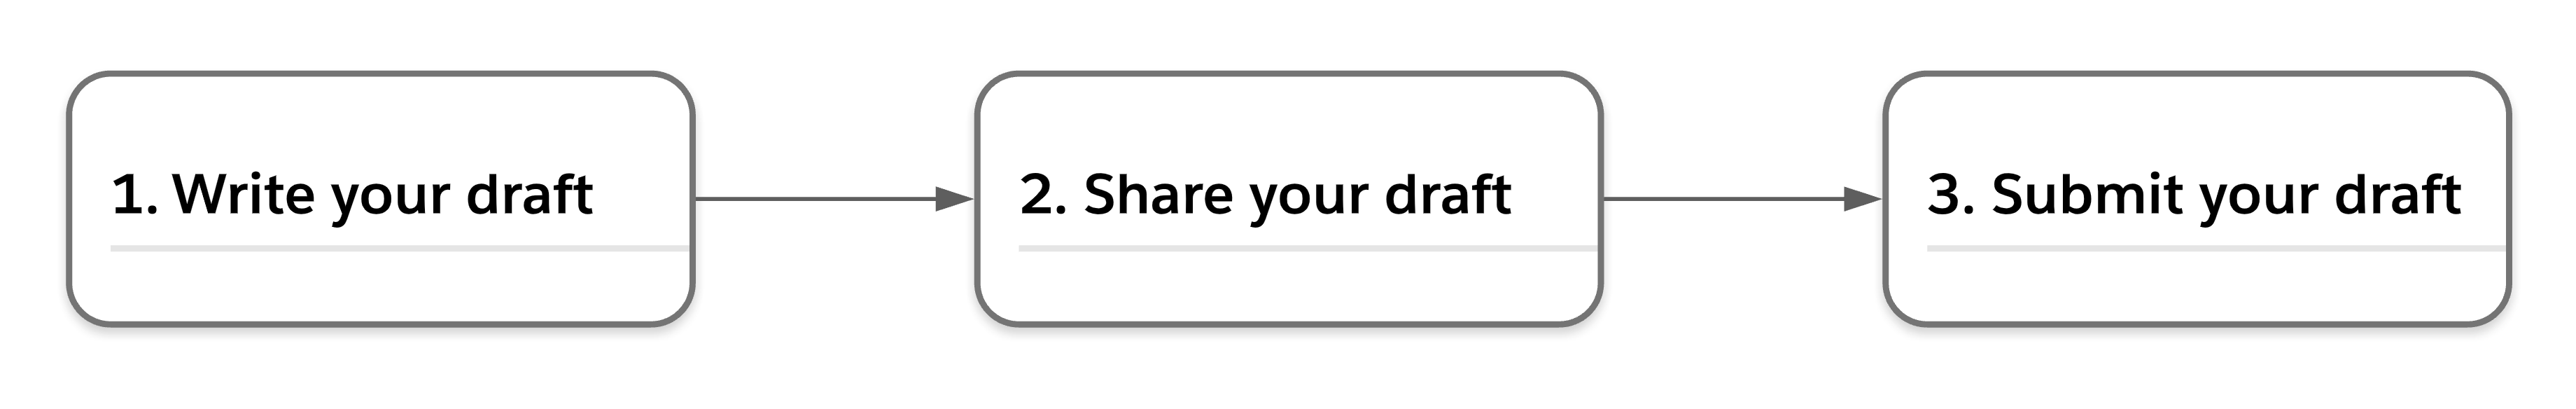 step 1 write your draft, step 2 share your draft, step 3 submit your draft